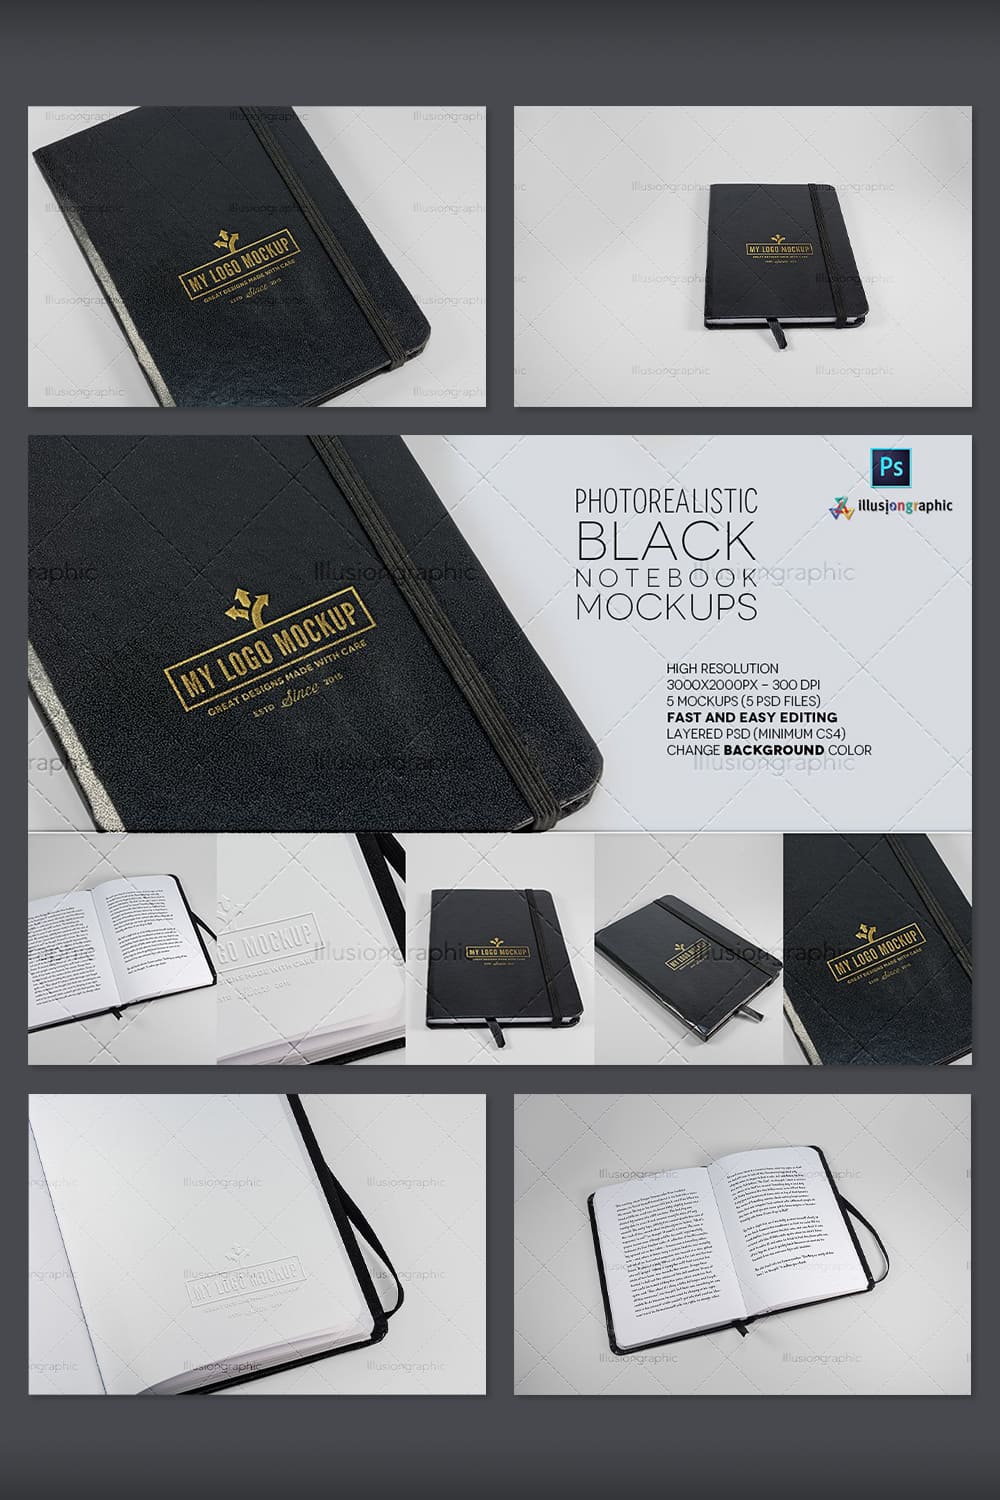 A set of images of notepads with amazing design.